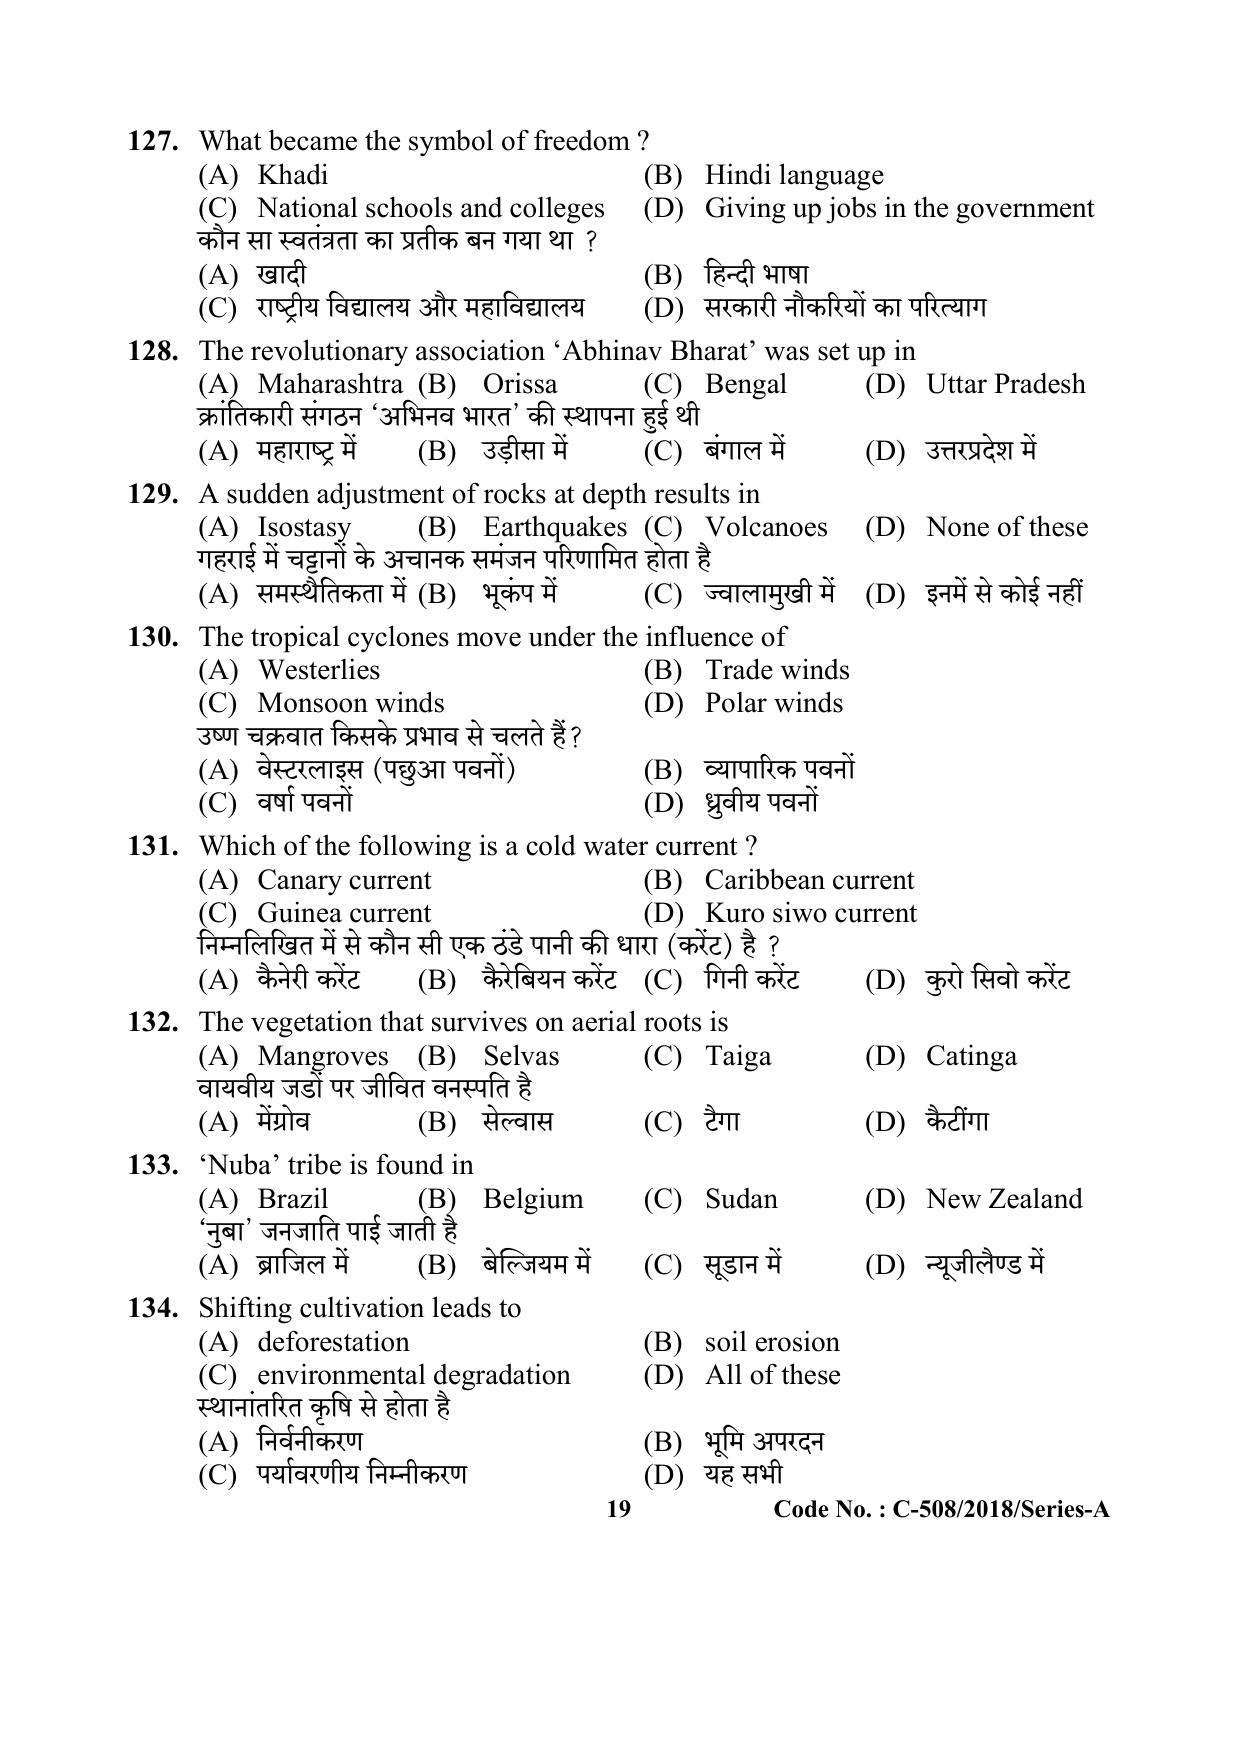 UP Health Worker Thematic Knowledge Previous Year Question Paper - Page 19